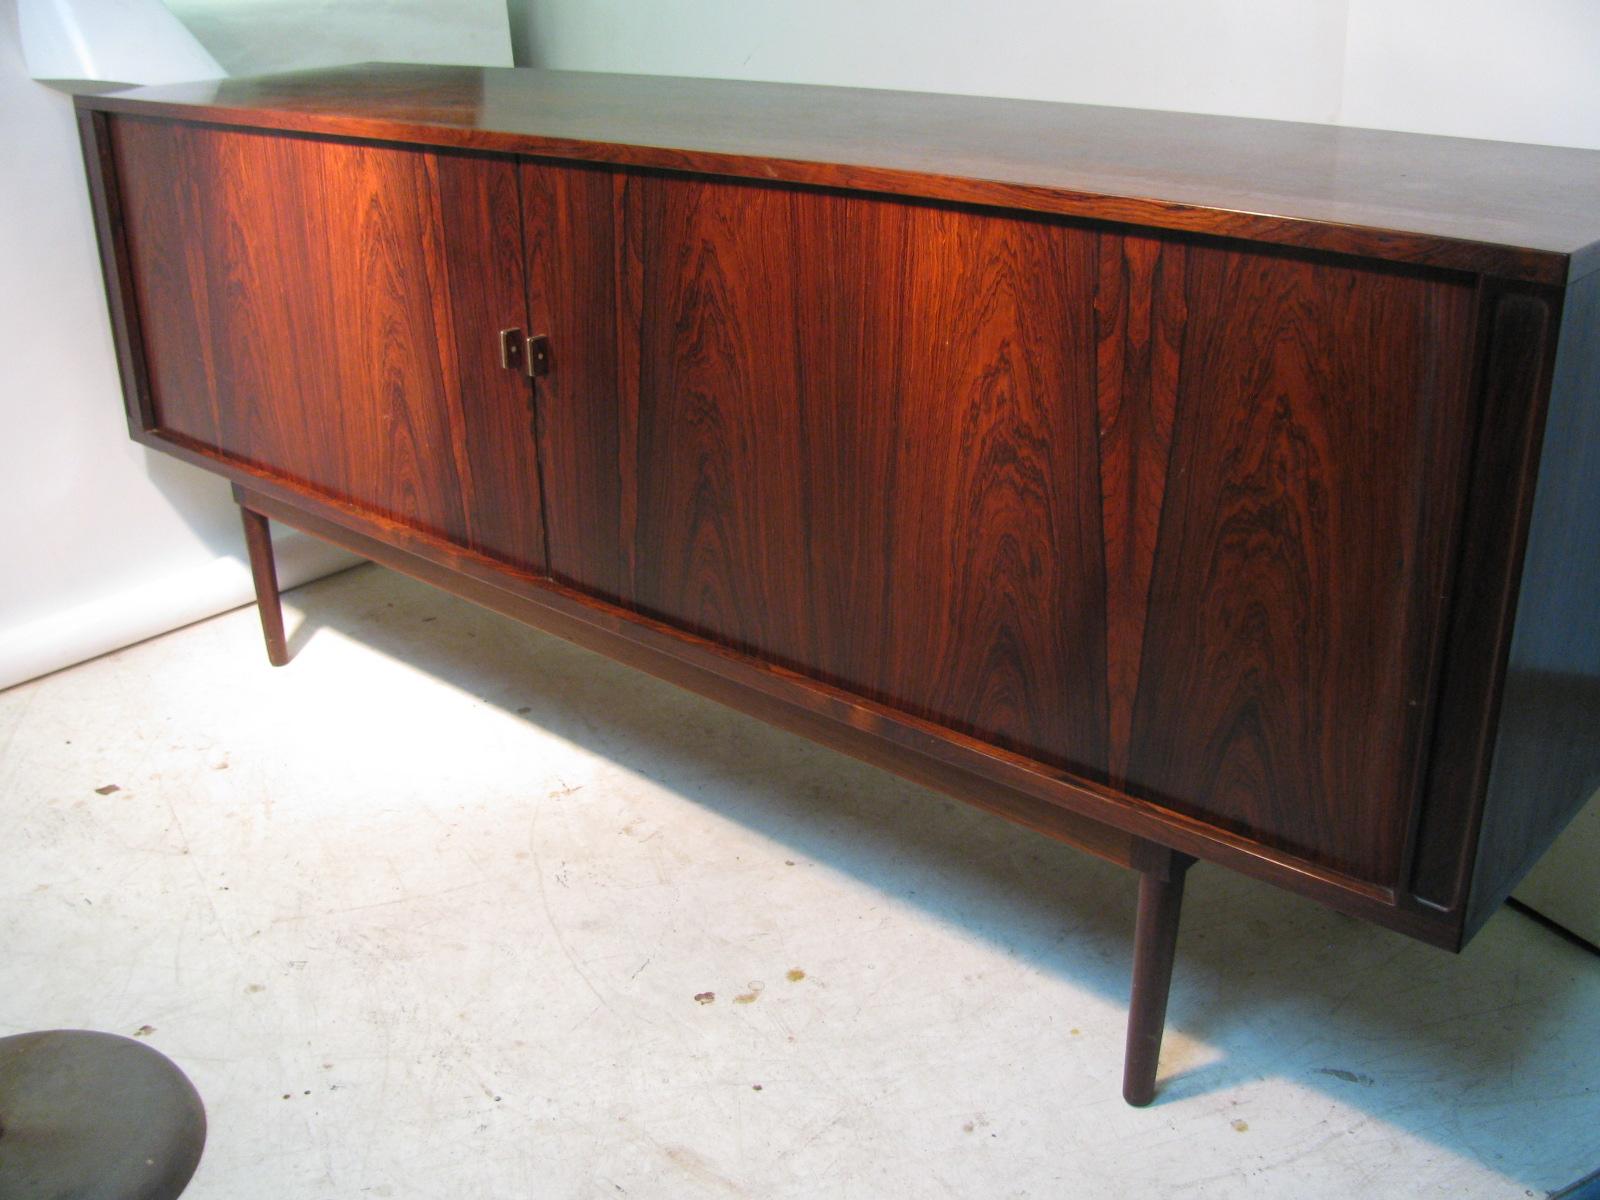 Stunning and sexy Danish rosewood credenza by Peter Lovig Nielsen. Dated 1967 on the underside. Simple and so elegant in its design. Tambour doors with dovetail construction glide open to reveal 5 center drawers for flatware and such. Total 3